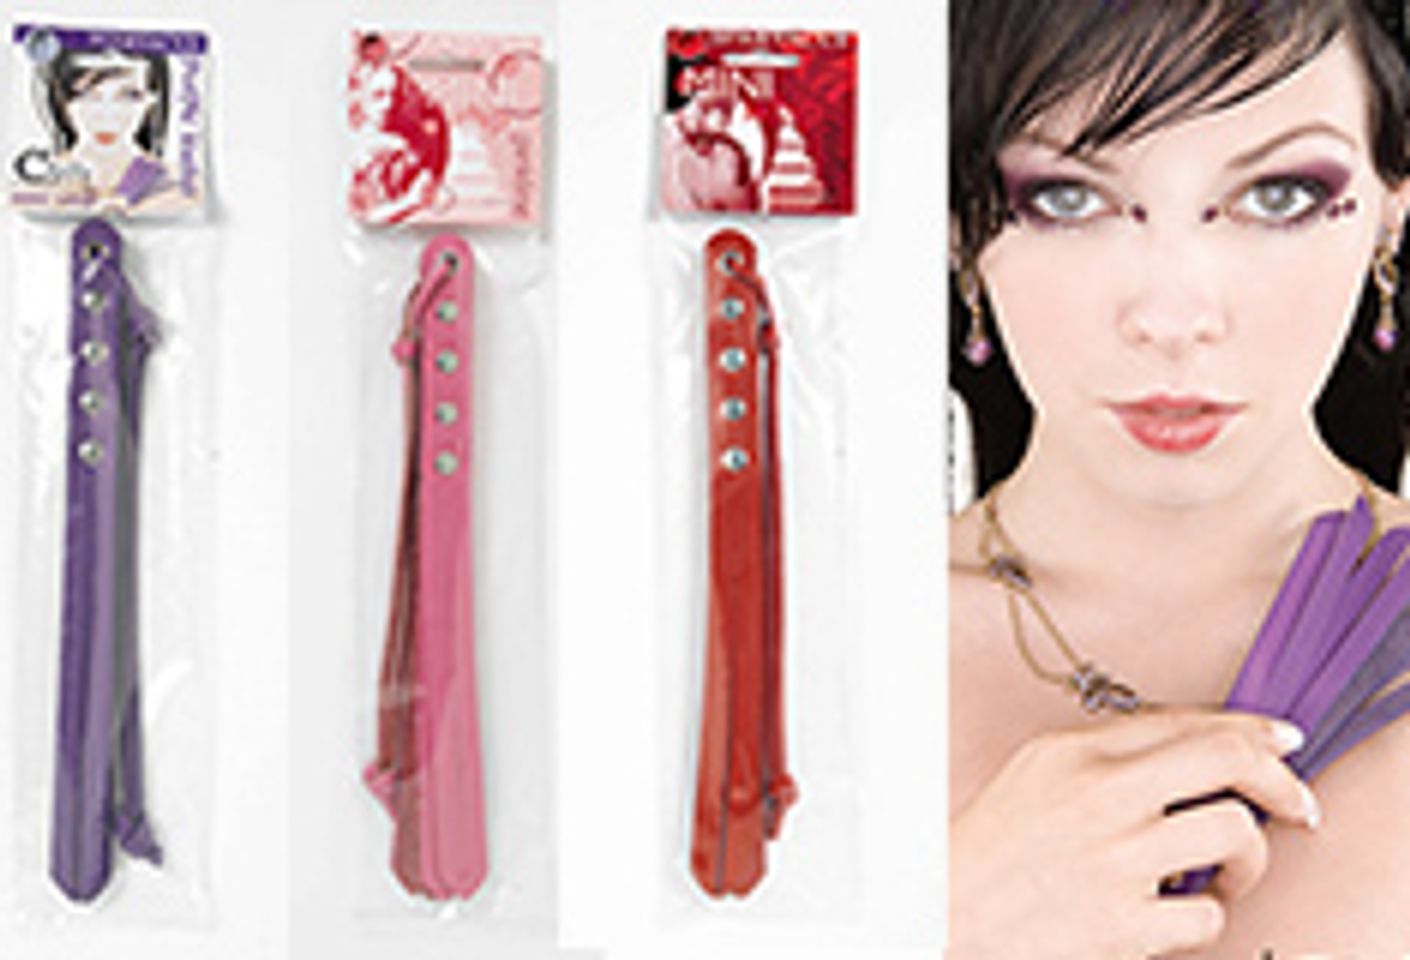 Spartacus Launches Flirty Mini-Whips